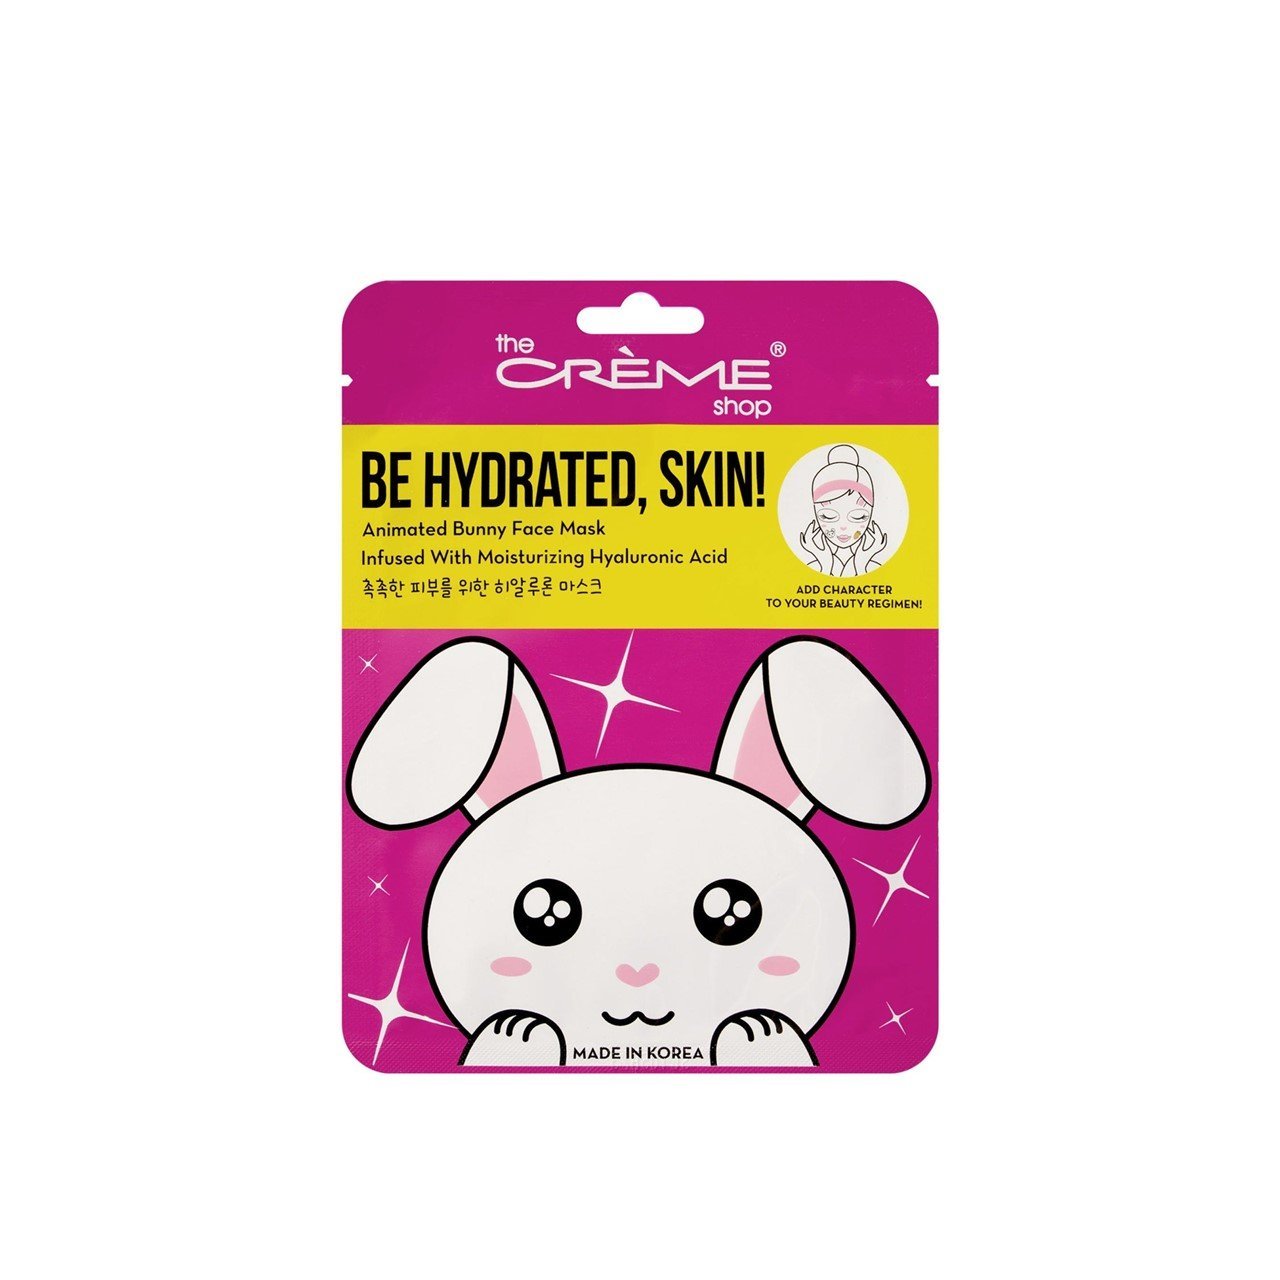 The Crème Shop Be Hydrated, Skin! Animated Bunny Face Mask 25g (0.88 oz)